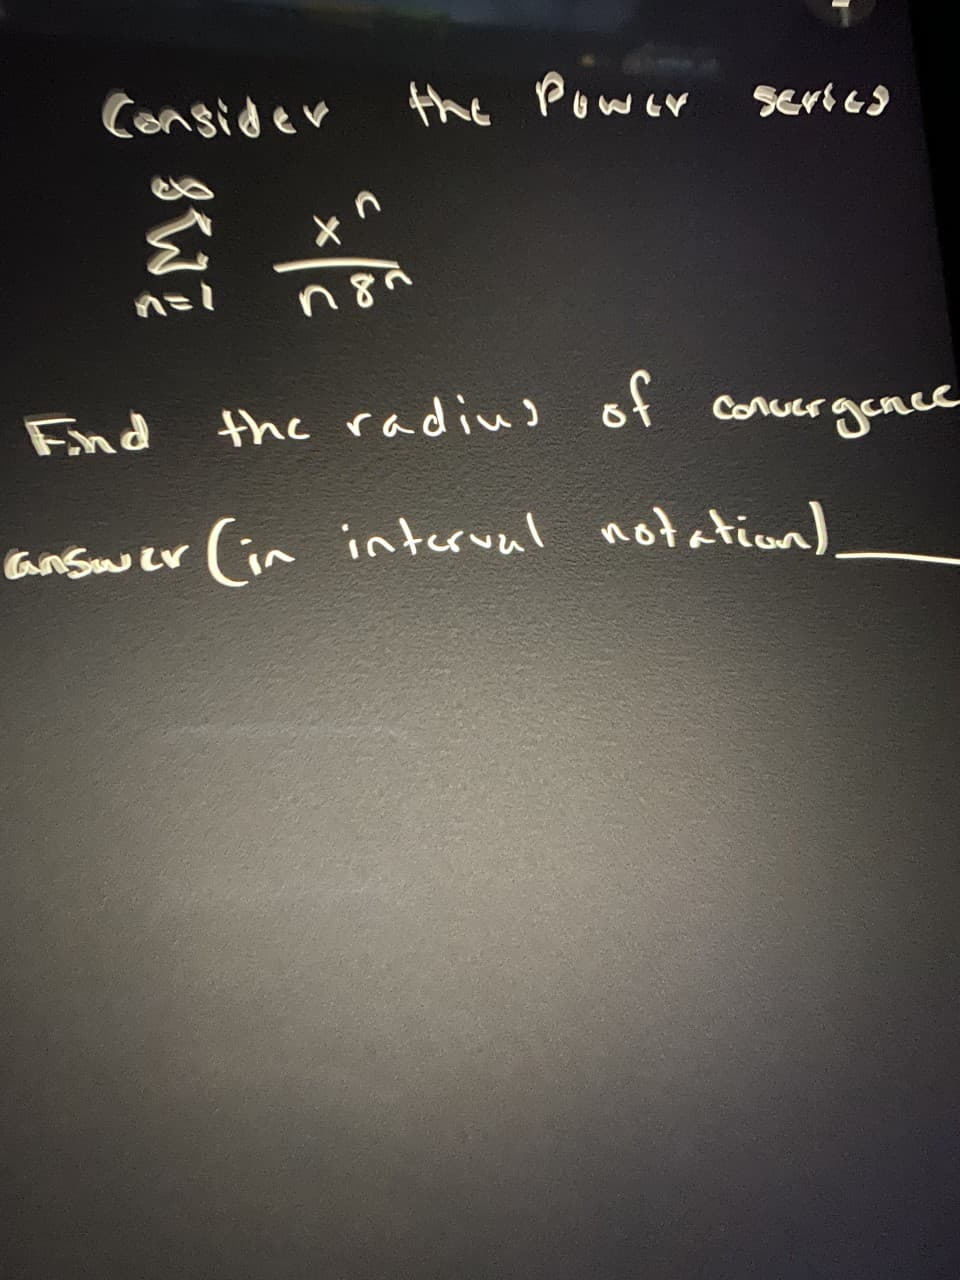 Consider
the Power
Seri es
End
the radius of concergeRce
Gnswer (in interval notation)
